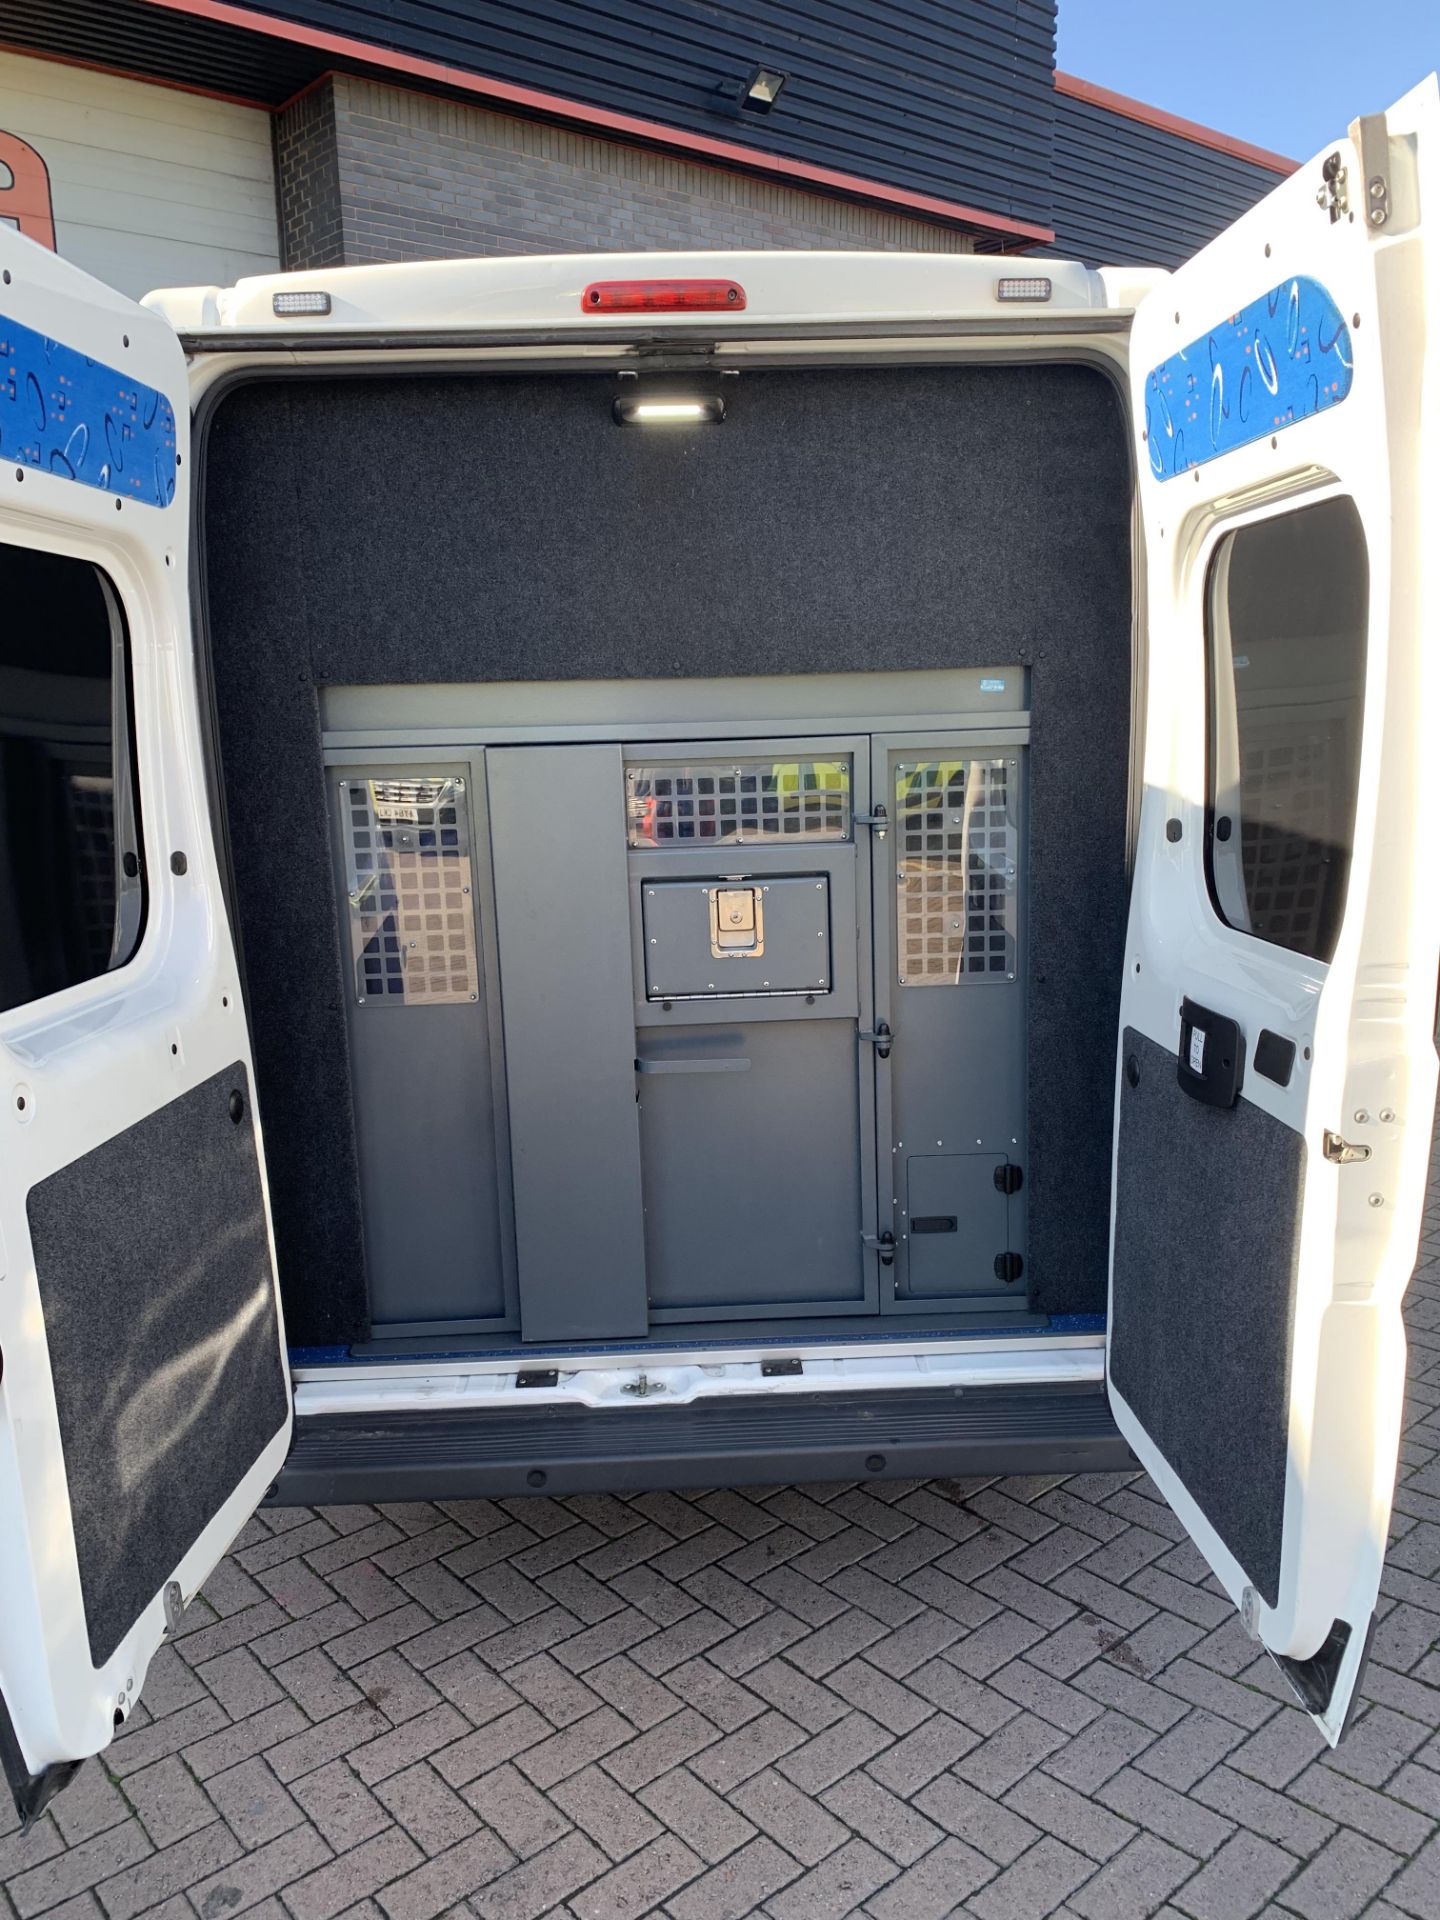 Citroen Relay 35 L3H2 Eprise Blue HDI secure cell covert ambulance, with rear steel prison transport - Bild 16 aus 17